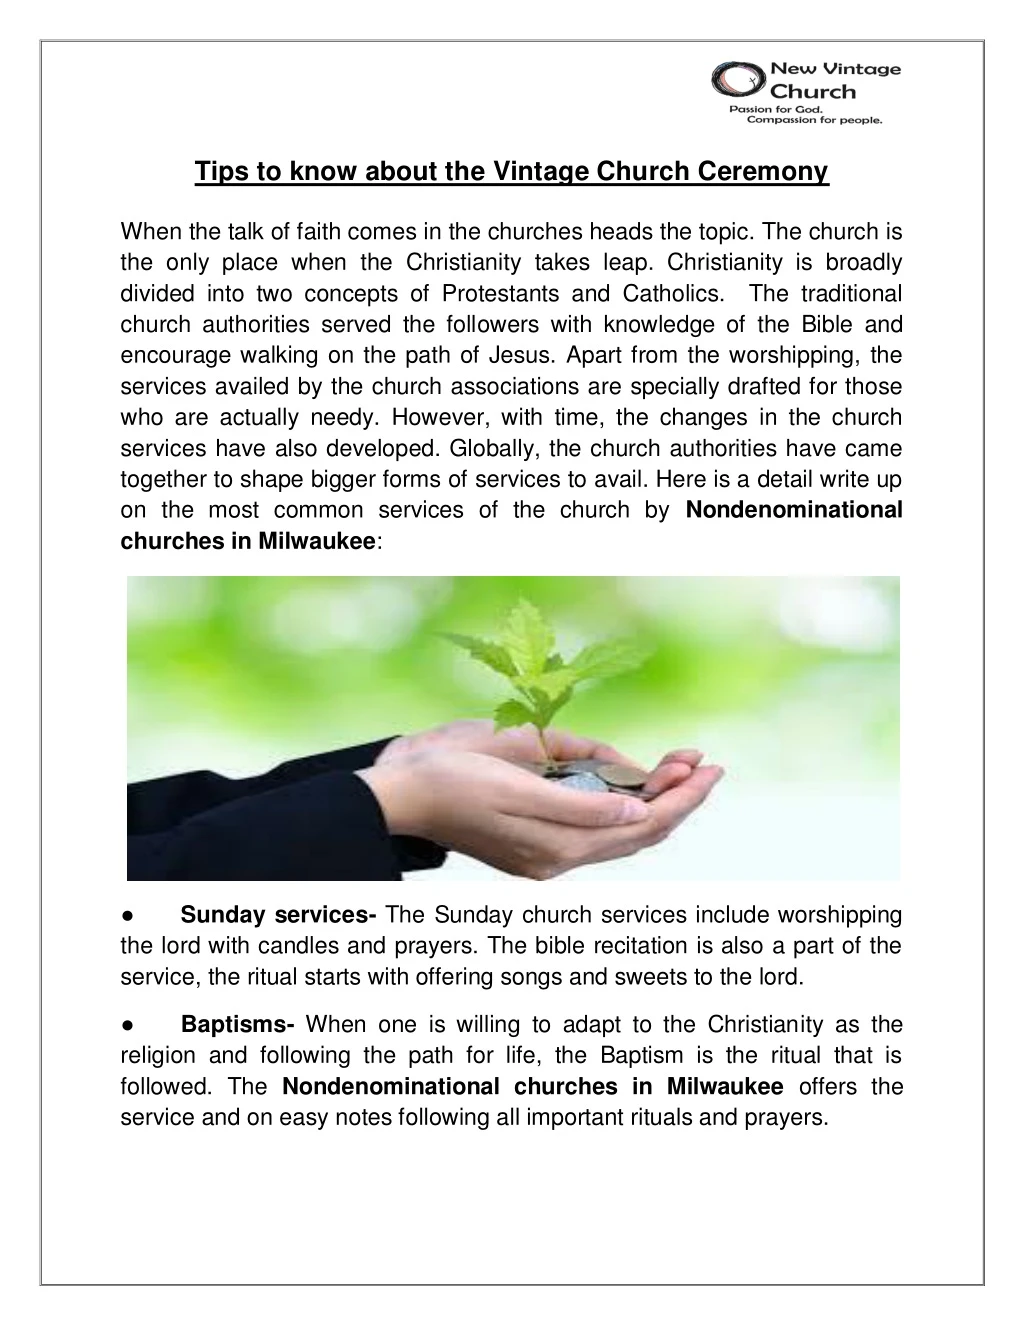 tips to know about the vintage church ceremony